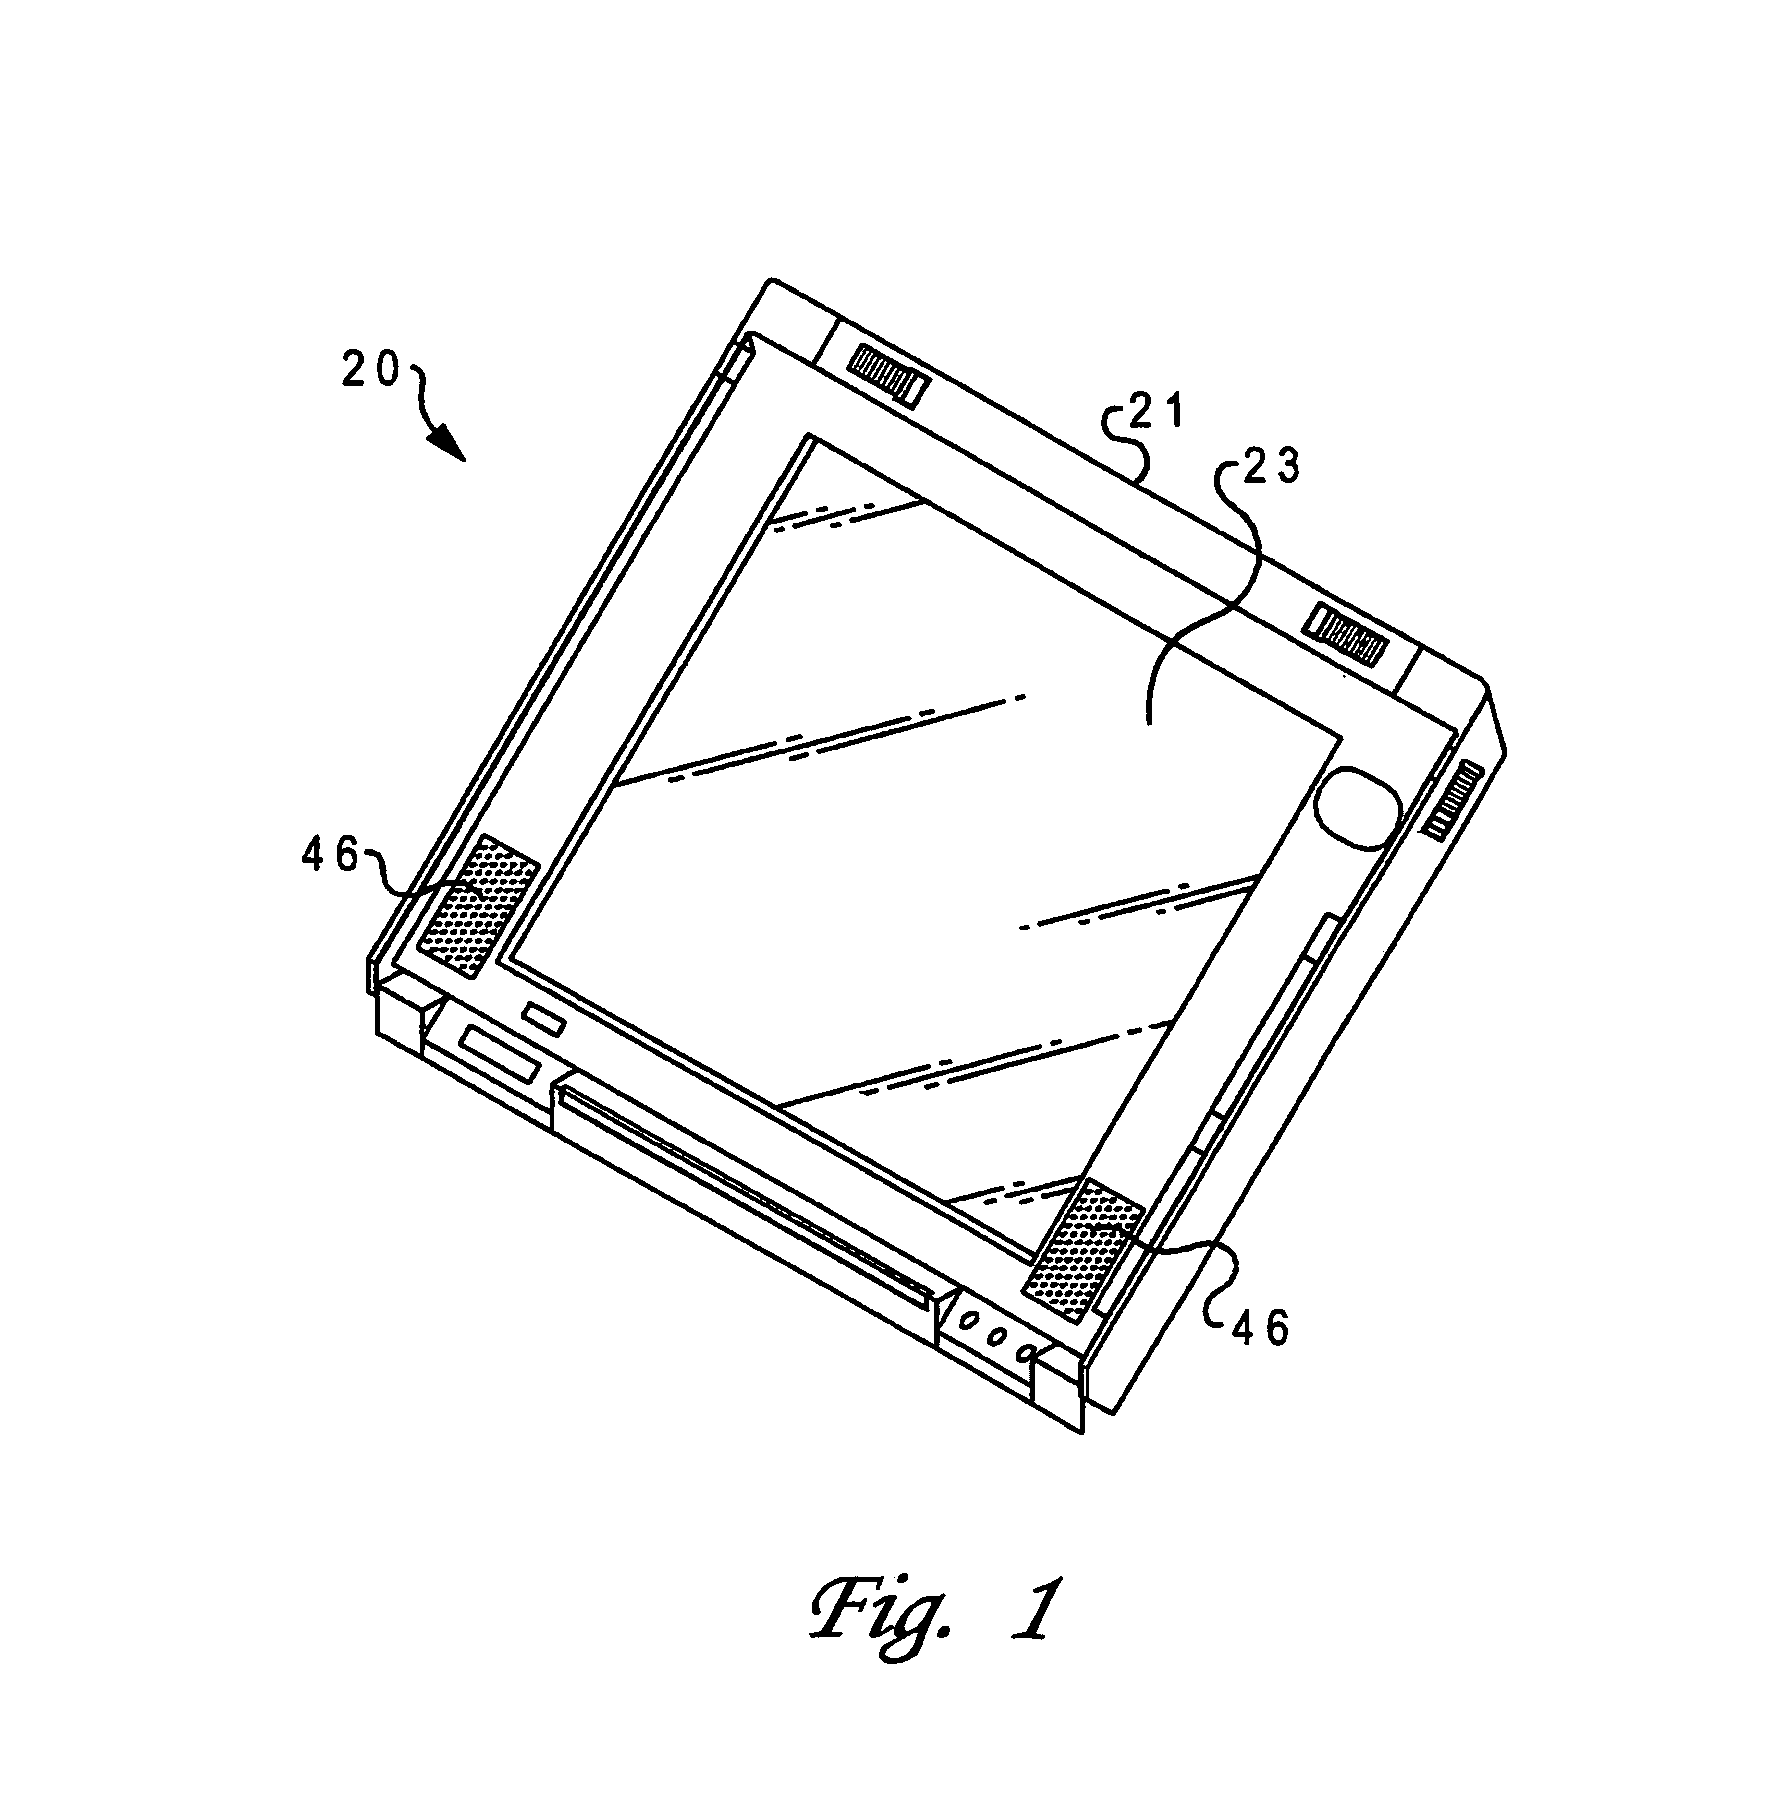 Method and system for touch screen keyboard and display space sharing